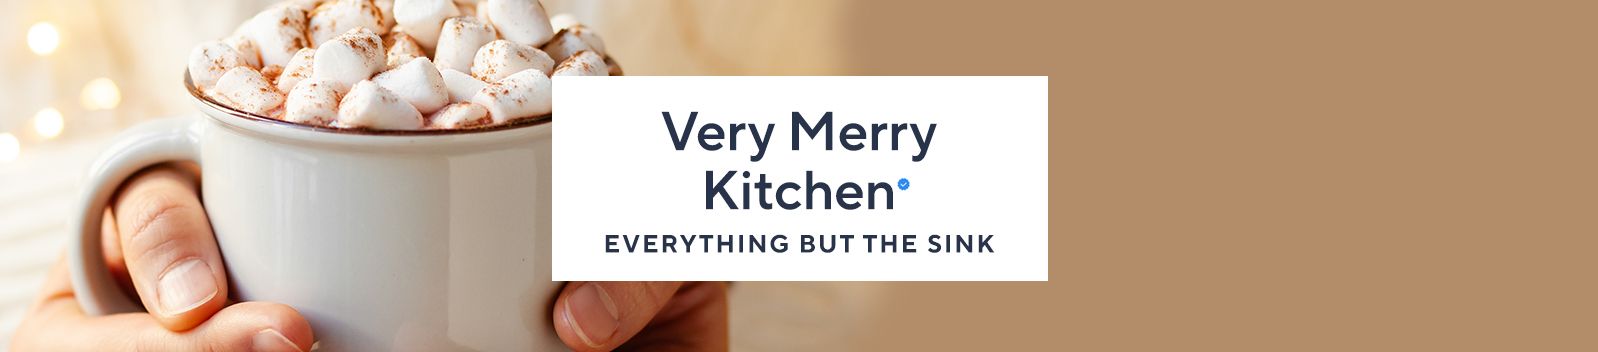 Very Merry Kitchen Everything but the Sink